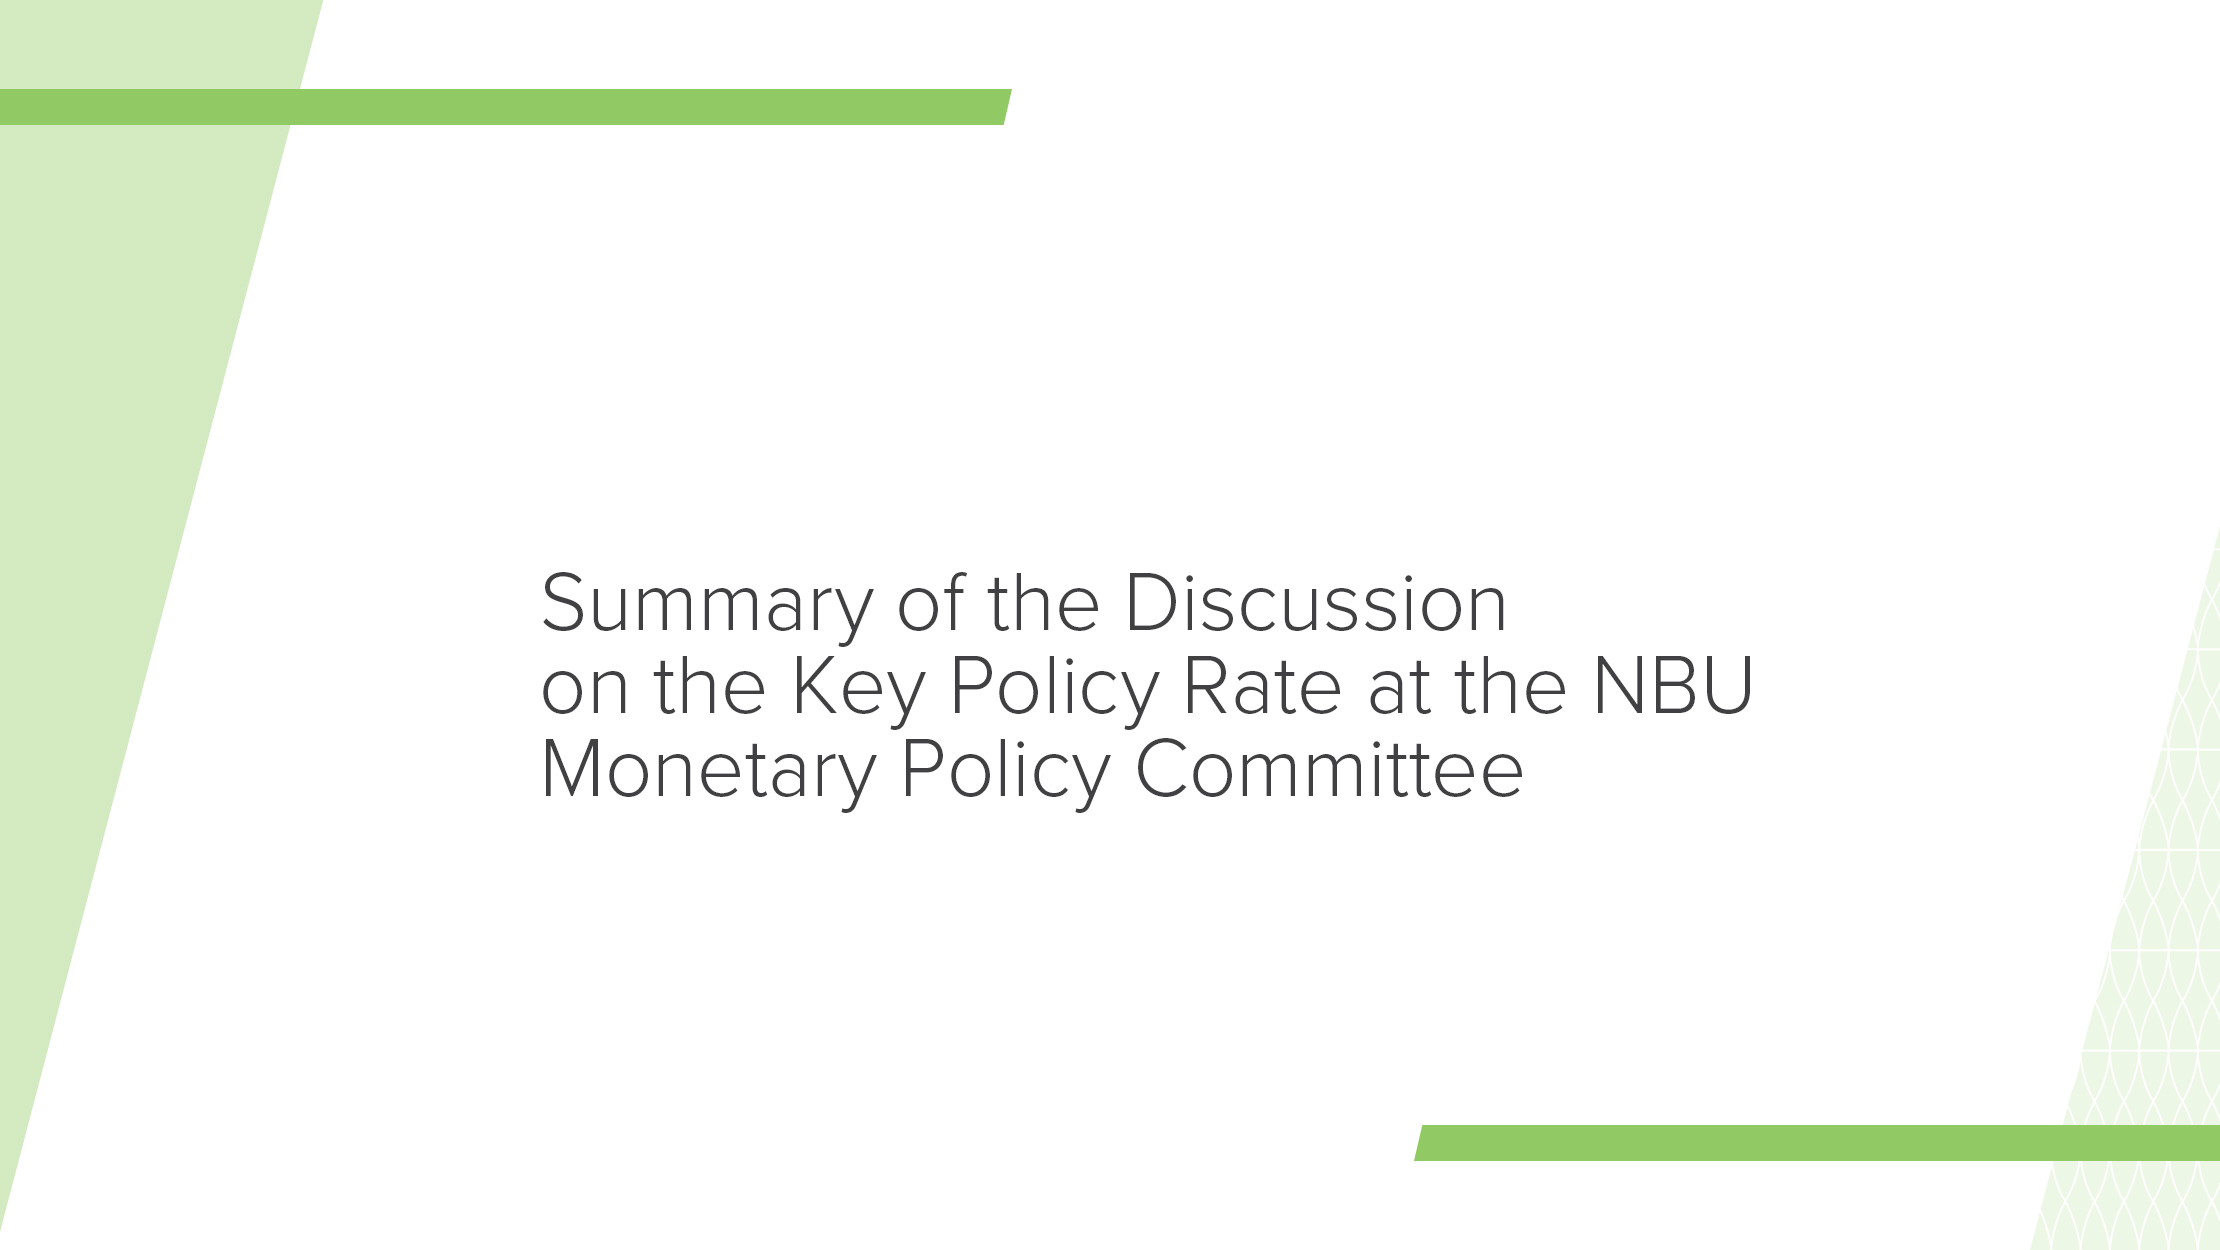 Summary of the Discussion on the Key Policy Rate at the recent meeting of the Monetary Policy Committee on 23 May 2018